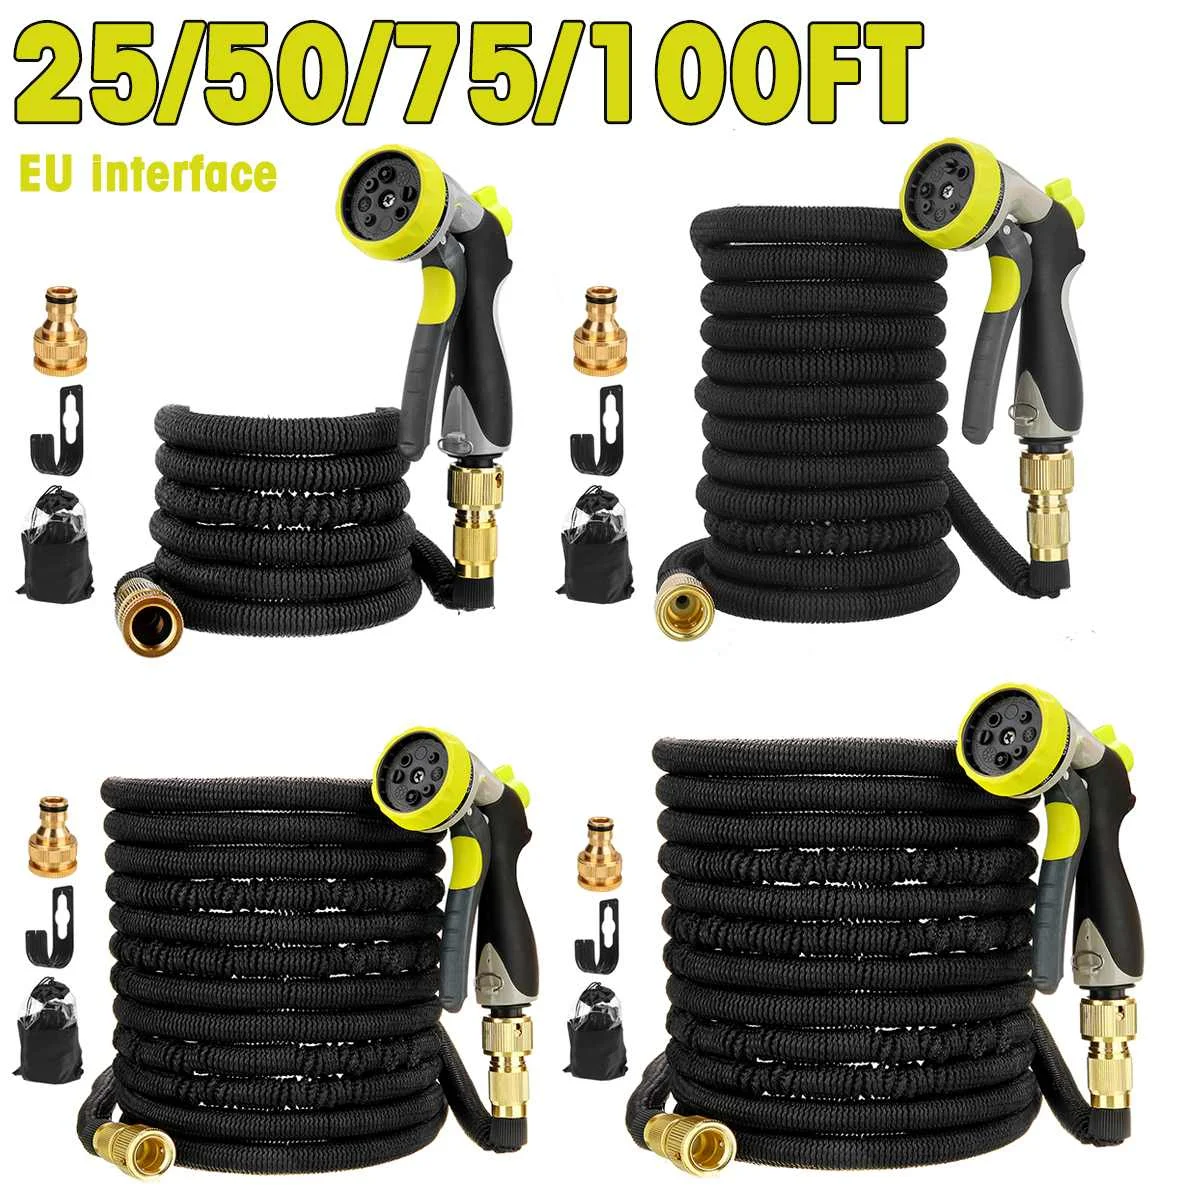 25/50/75/100FT Expandable Flexible Garden Water Hose Latex Tube US Connect 